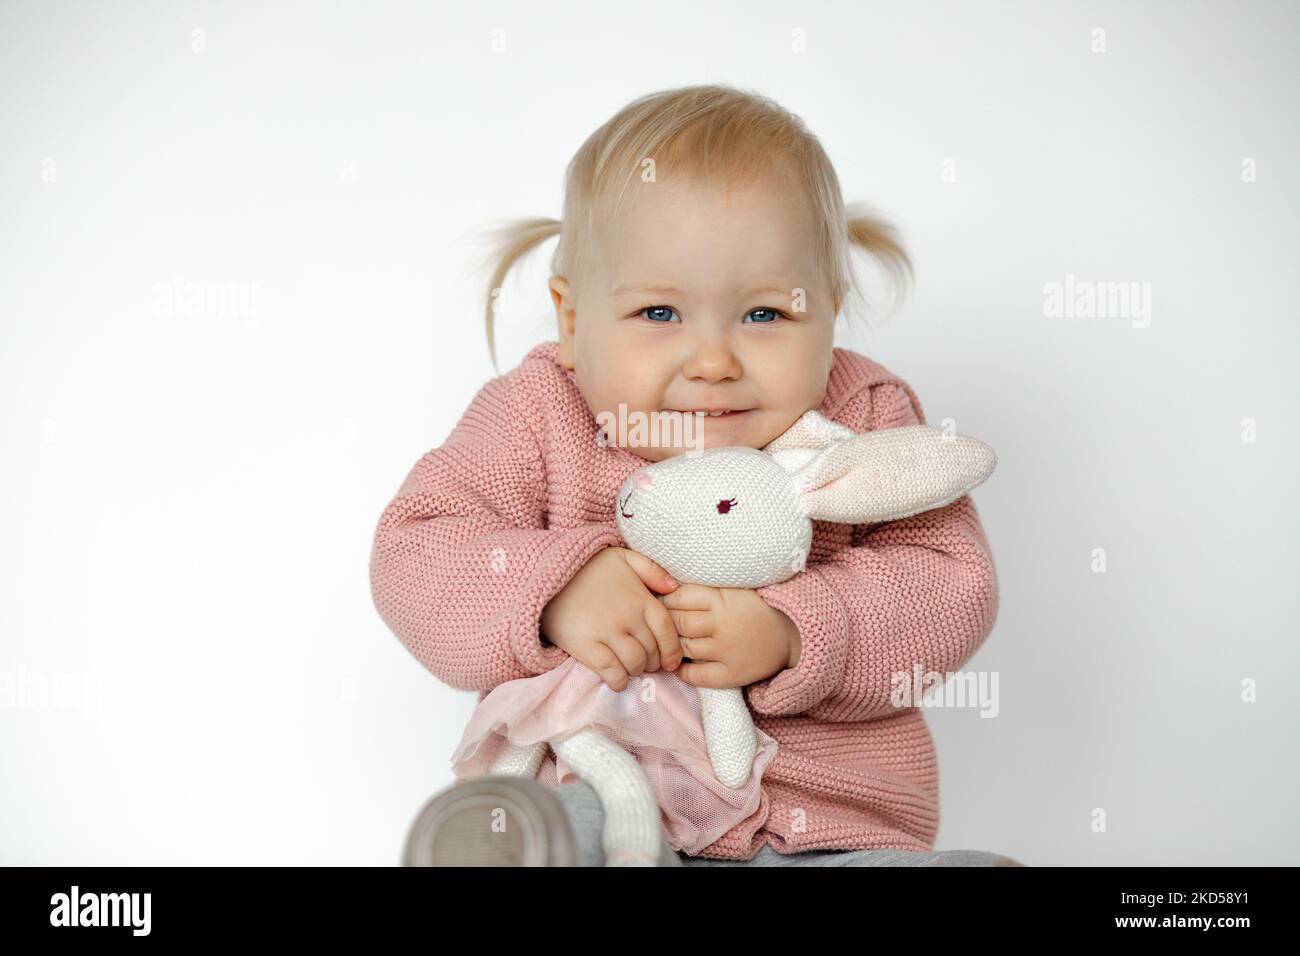 Lovely baby girl play with stuffed animal, isolated on white. Overjoyed toddler gladly embracing teddy bunny. Blonde haired child in pink clothes Stock Photo